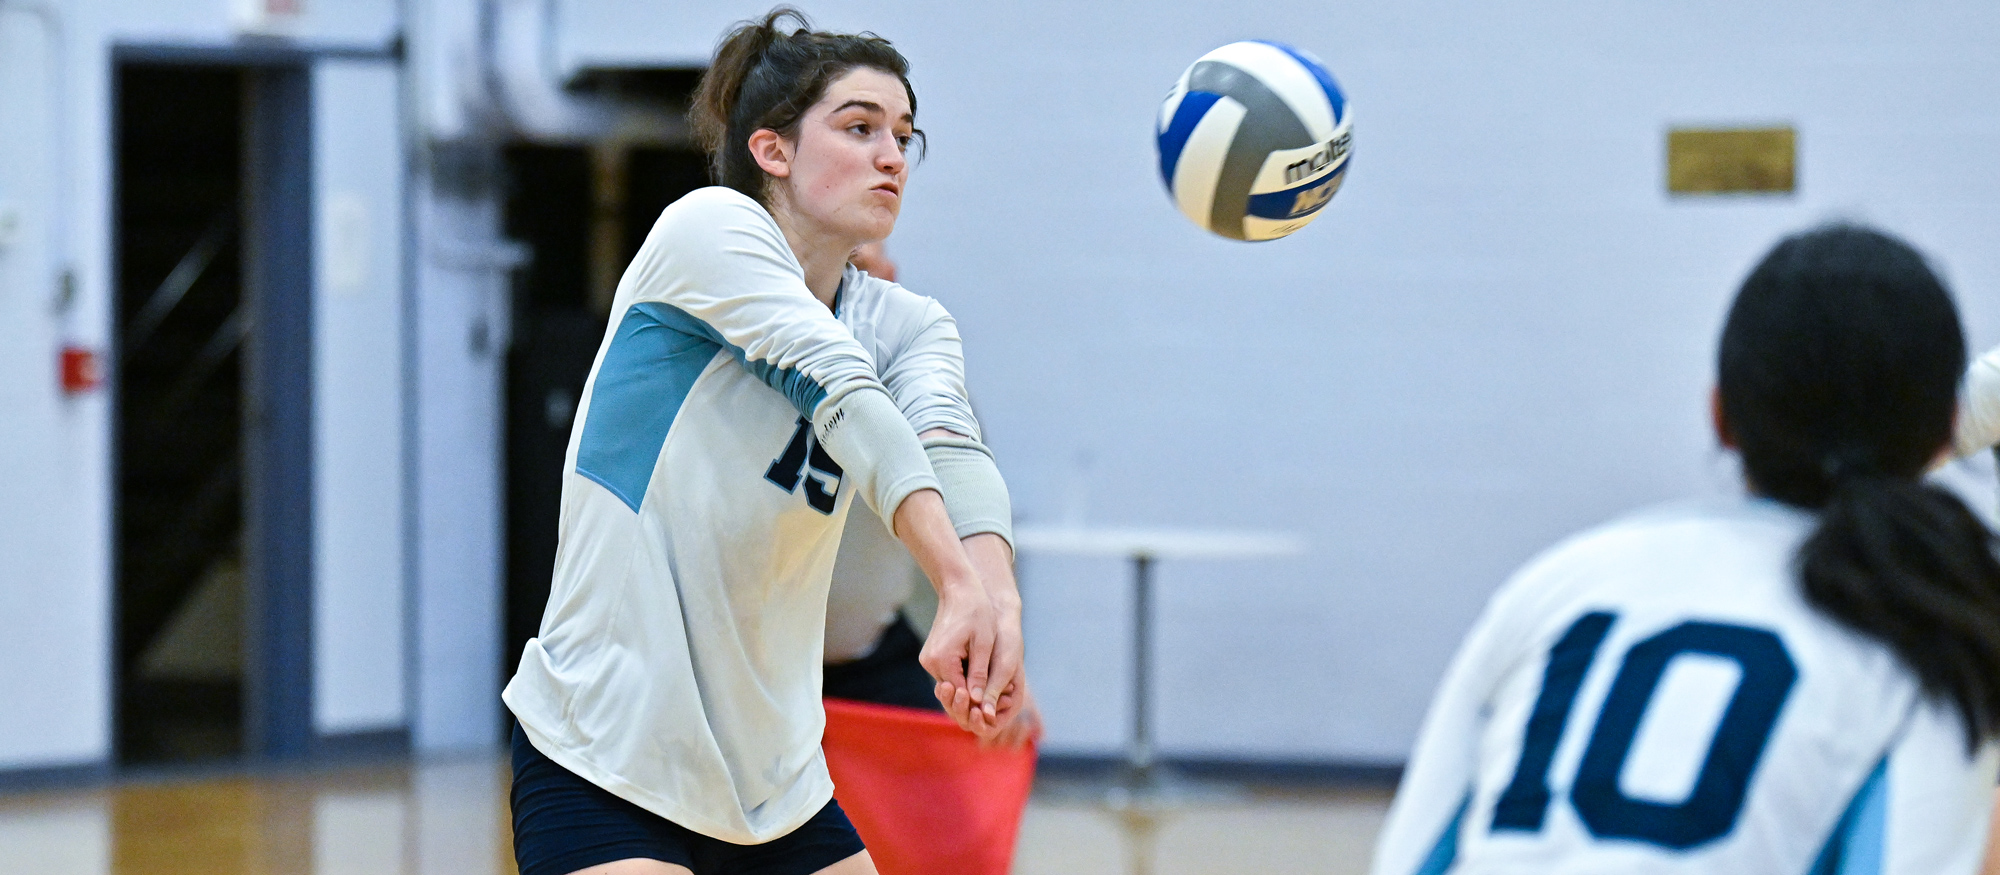 Madeline Barton had 13 kills, 14 digs and two blocks in Mount Holyoke's 3-0 loss at Western New England University on Oct. 6, 2023. (RJB Sports file photo)